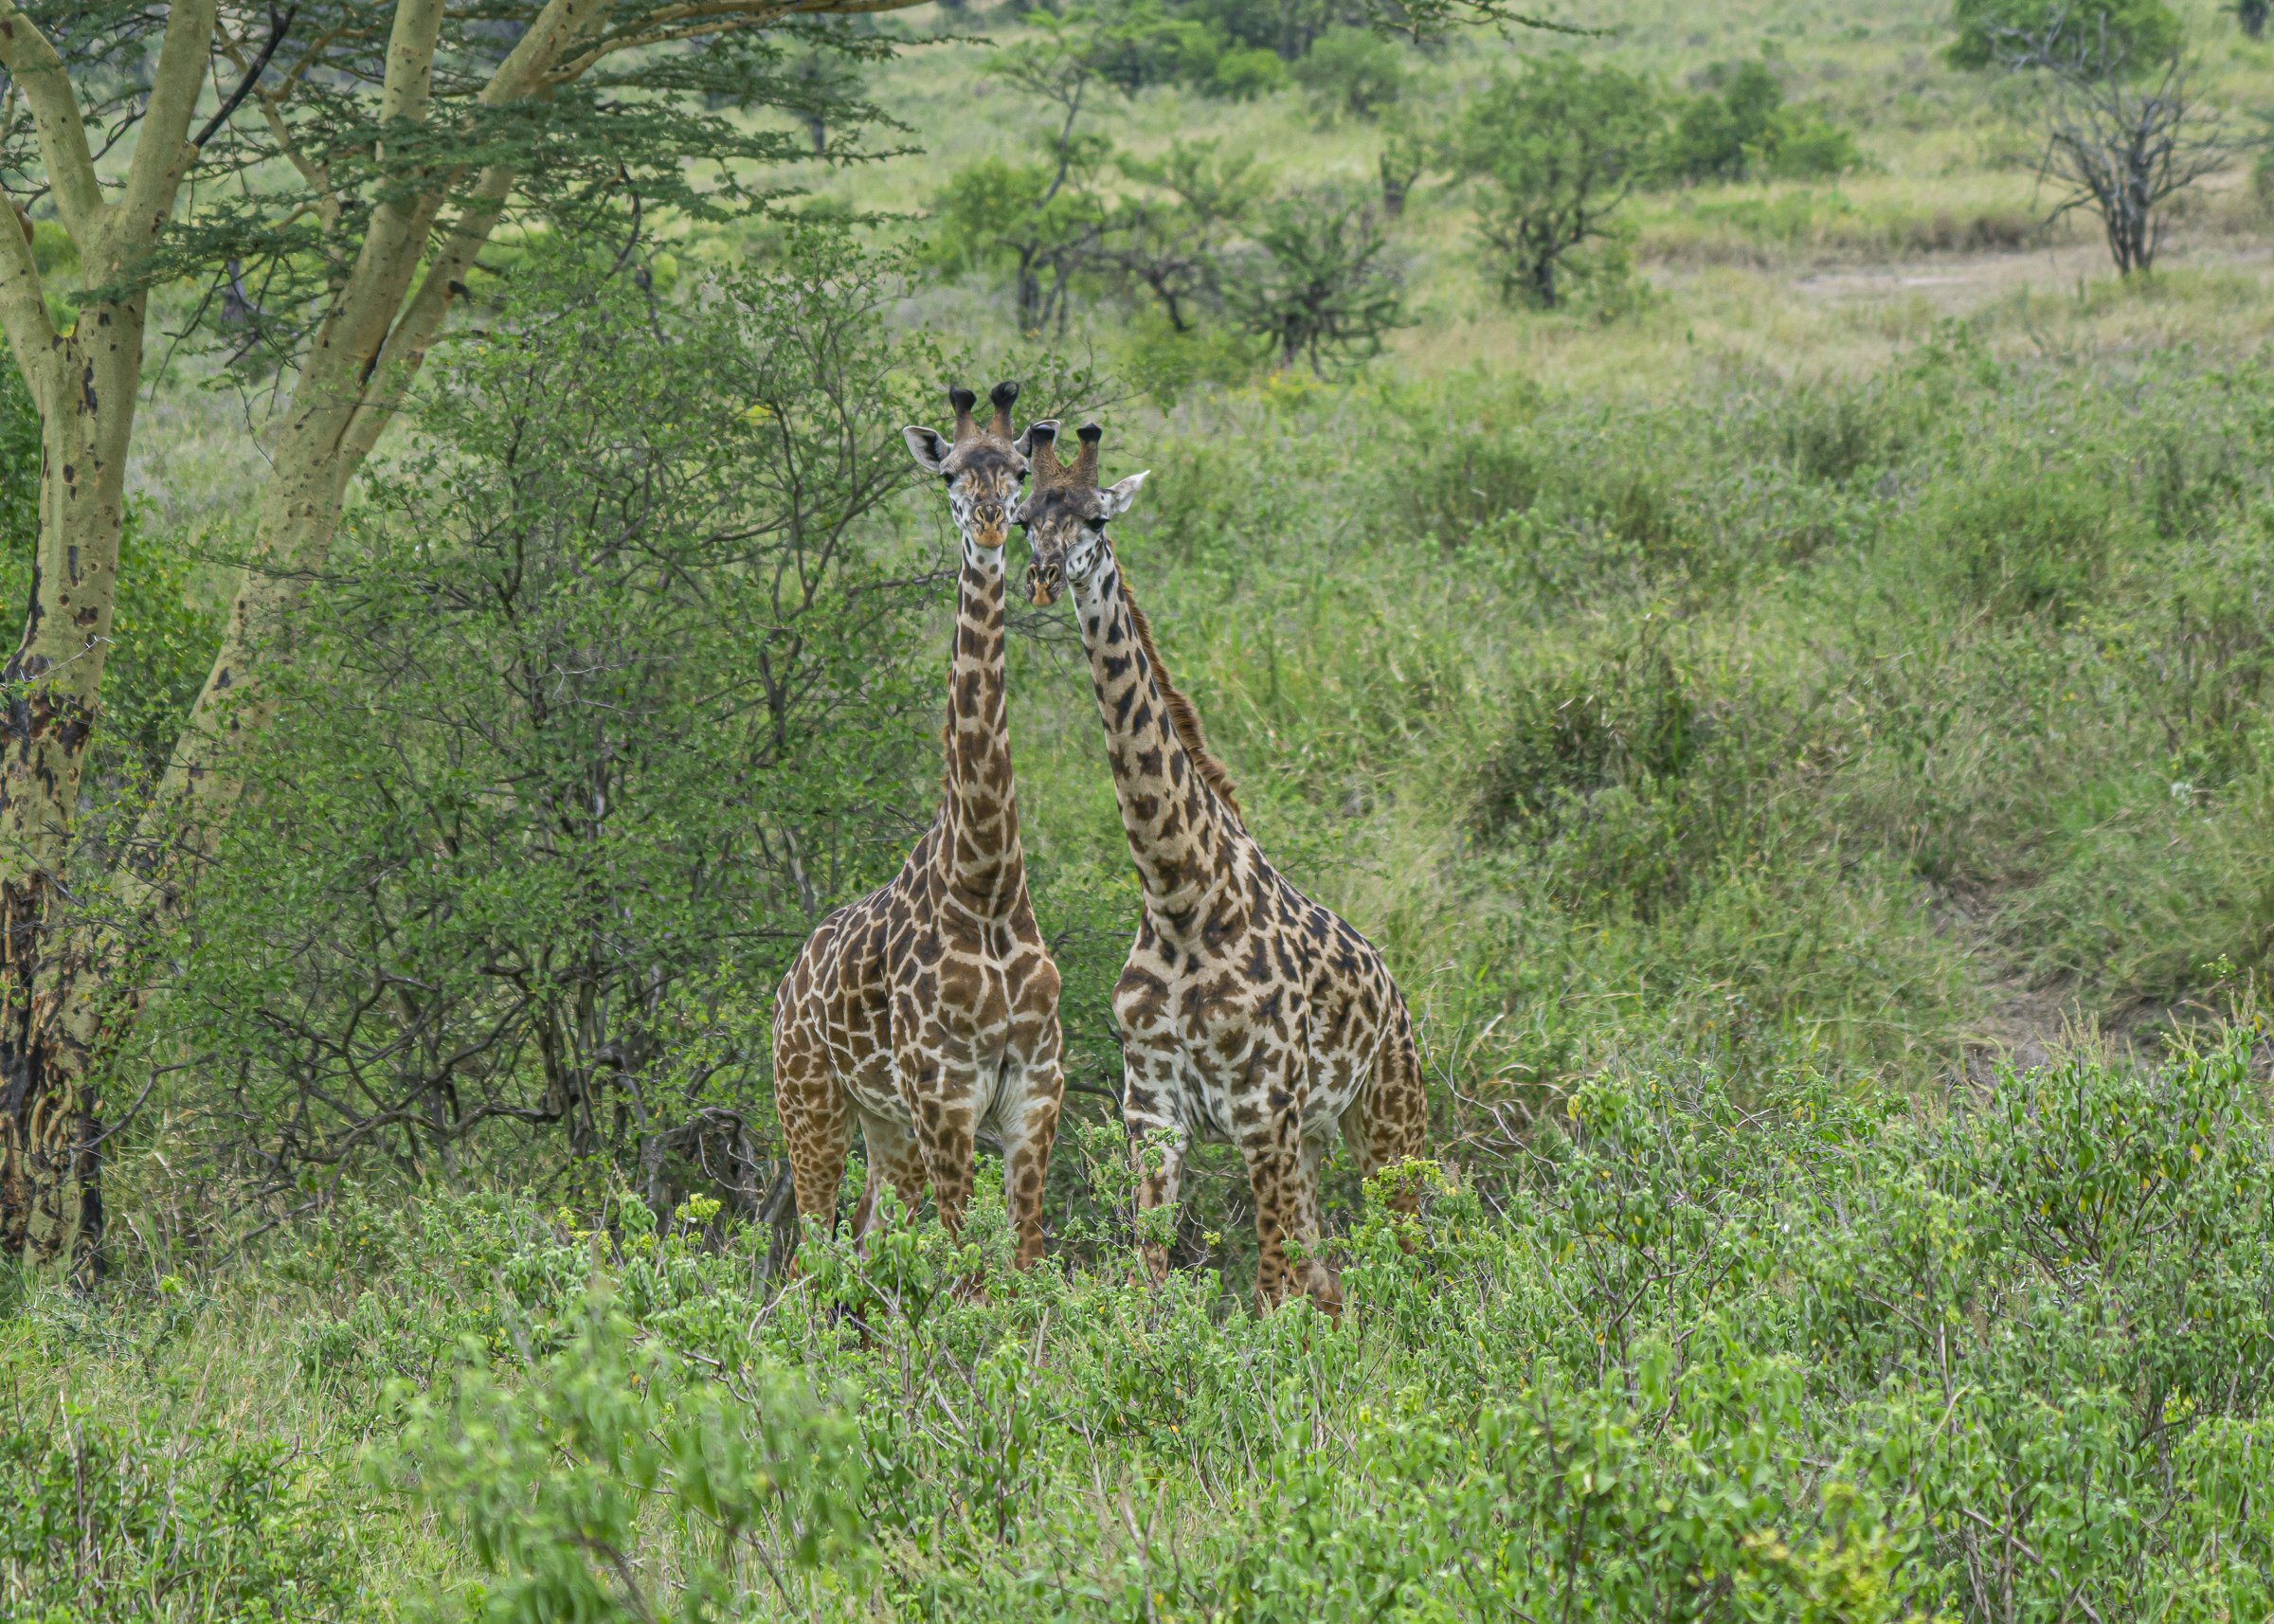 Masai Giraffes Just the two of us